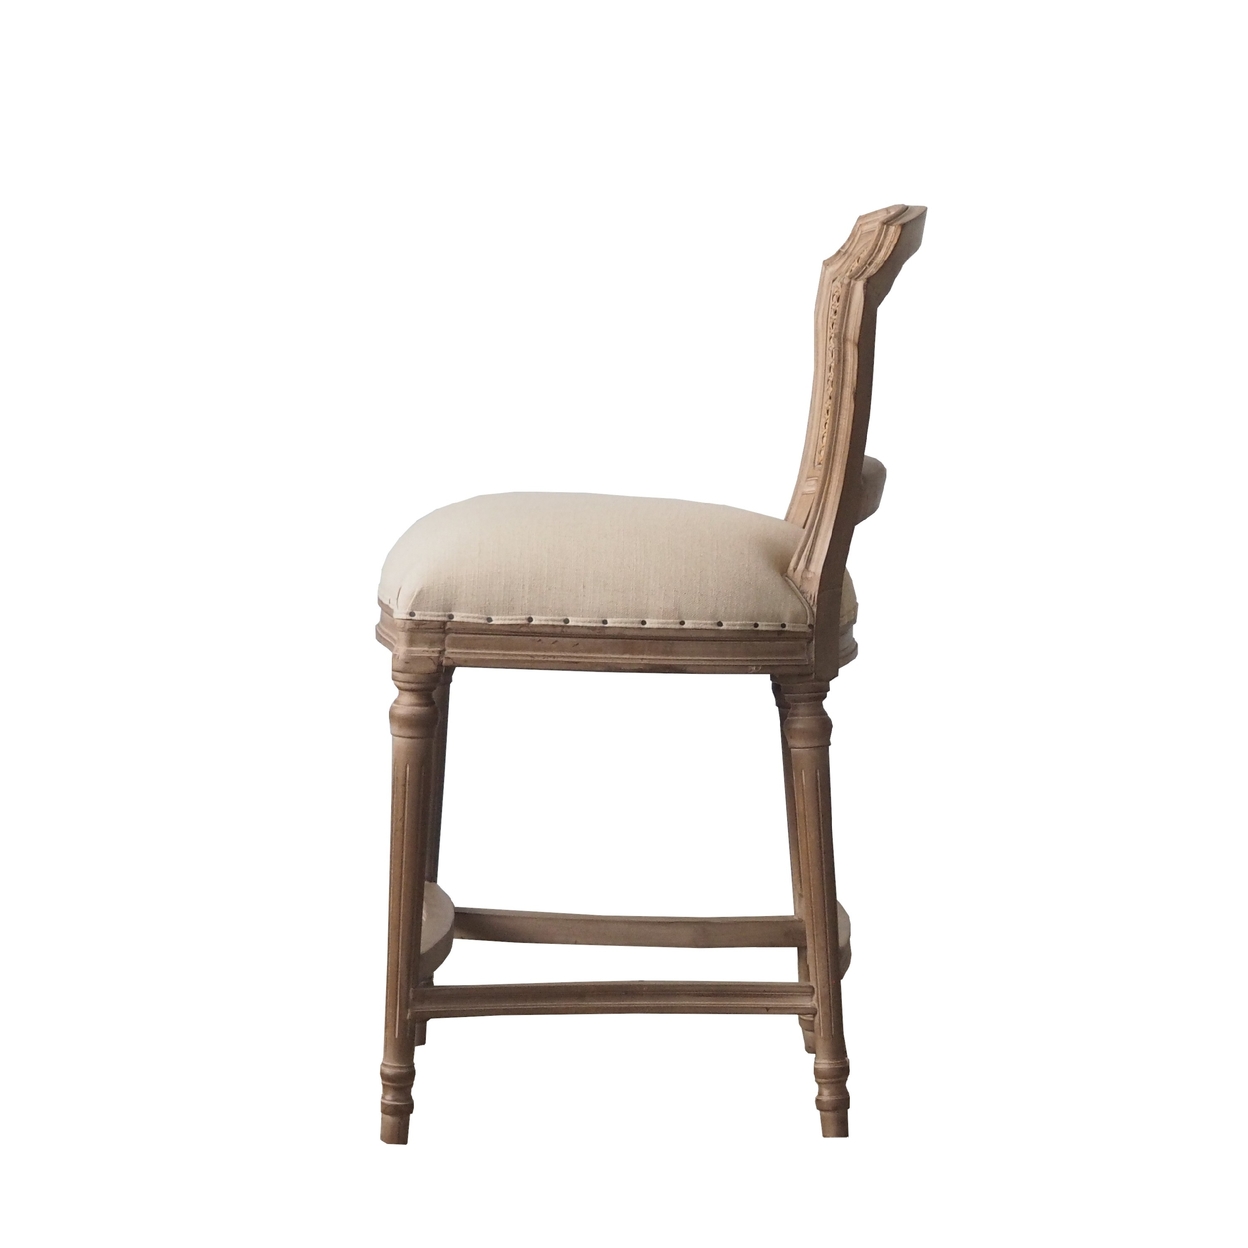 Nailhead Fabric Upholstered Bar Stool With Perforated Back, Beige And Brown- Saltoro Sherpi